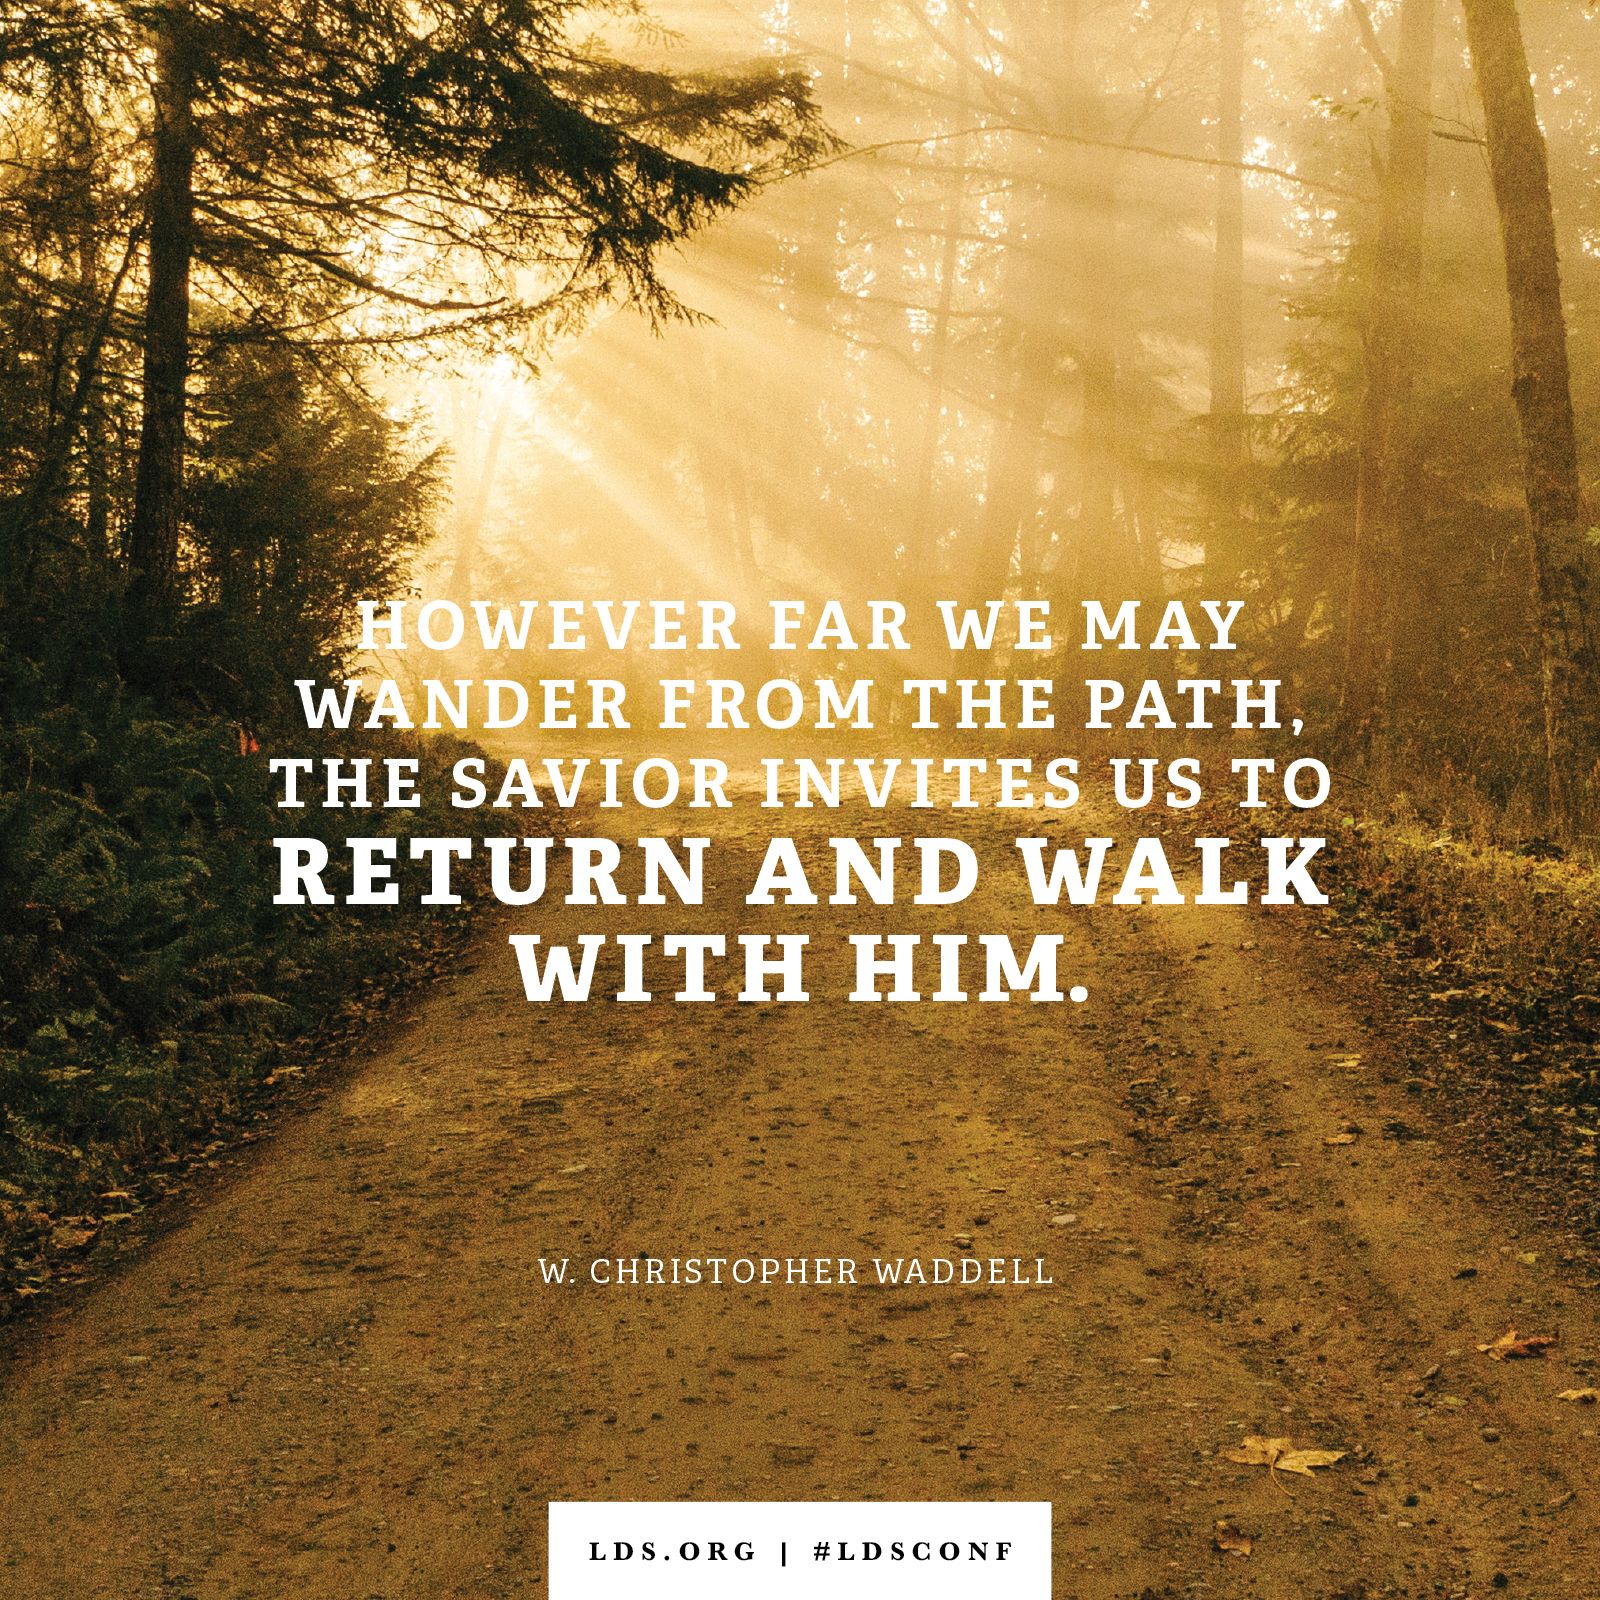 “However far we may wander from the path, the Savior invites us to return and walk with Him.” —Bishop W. Christopher Waddell, “A Pattern for Peace”